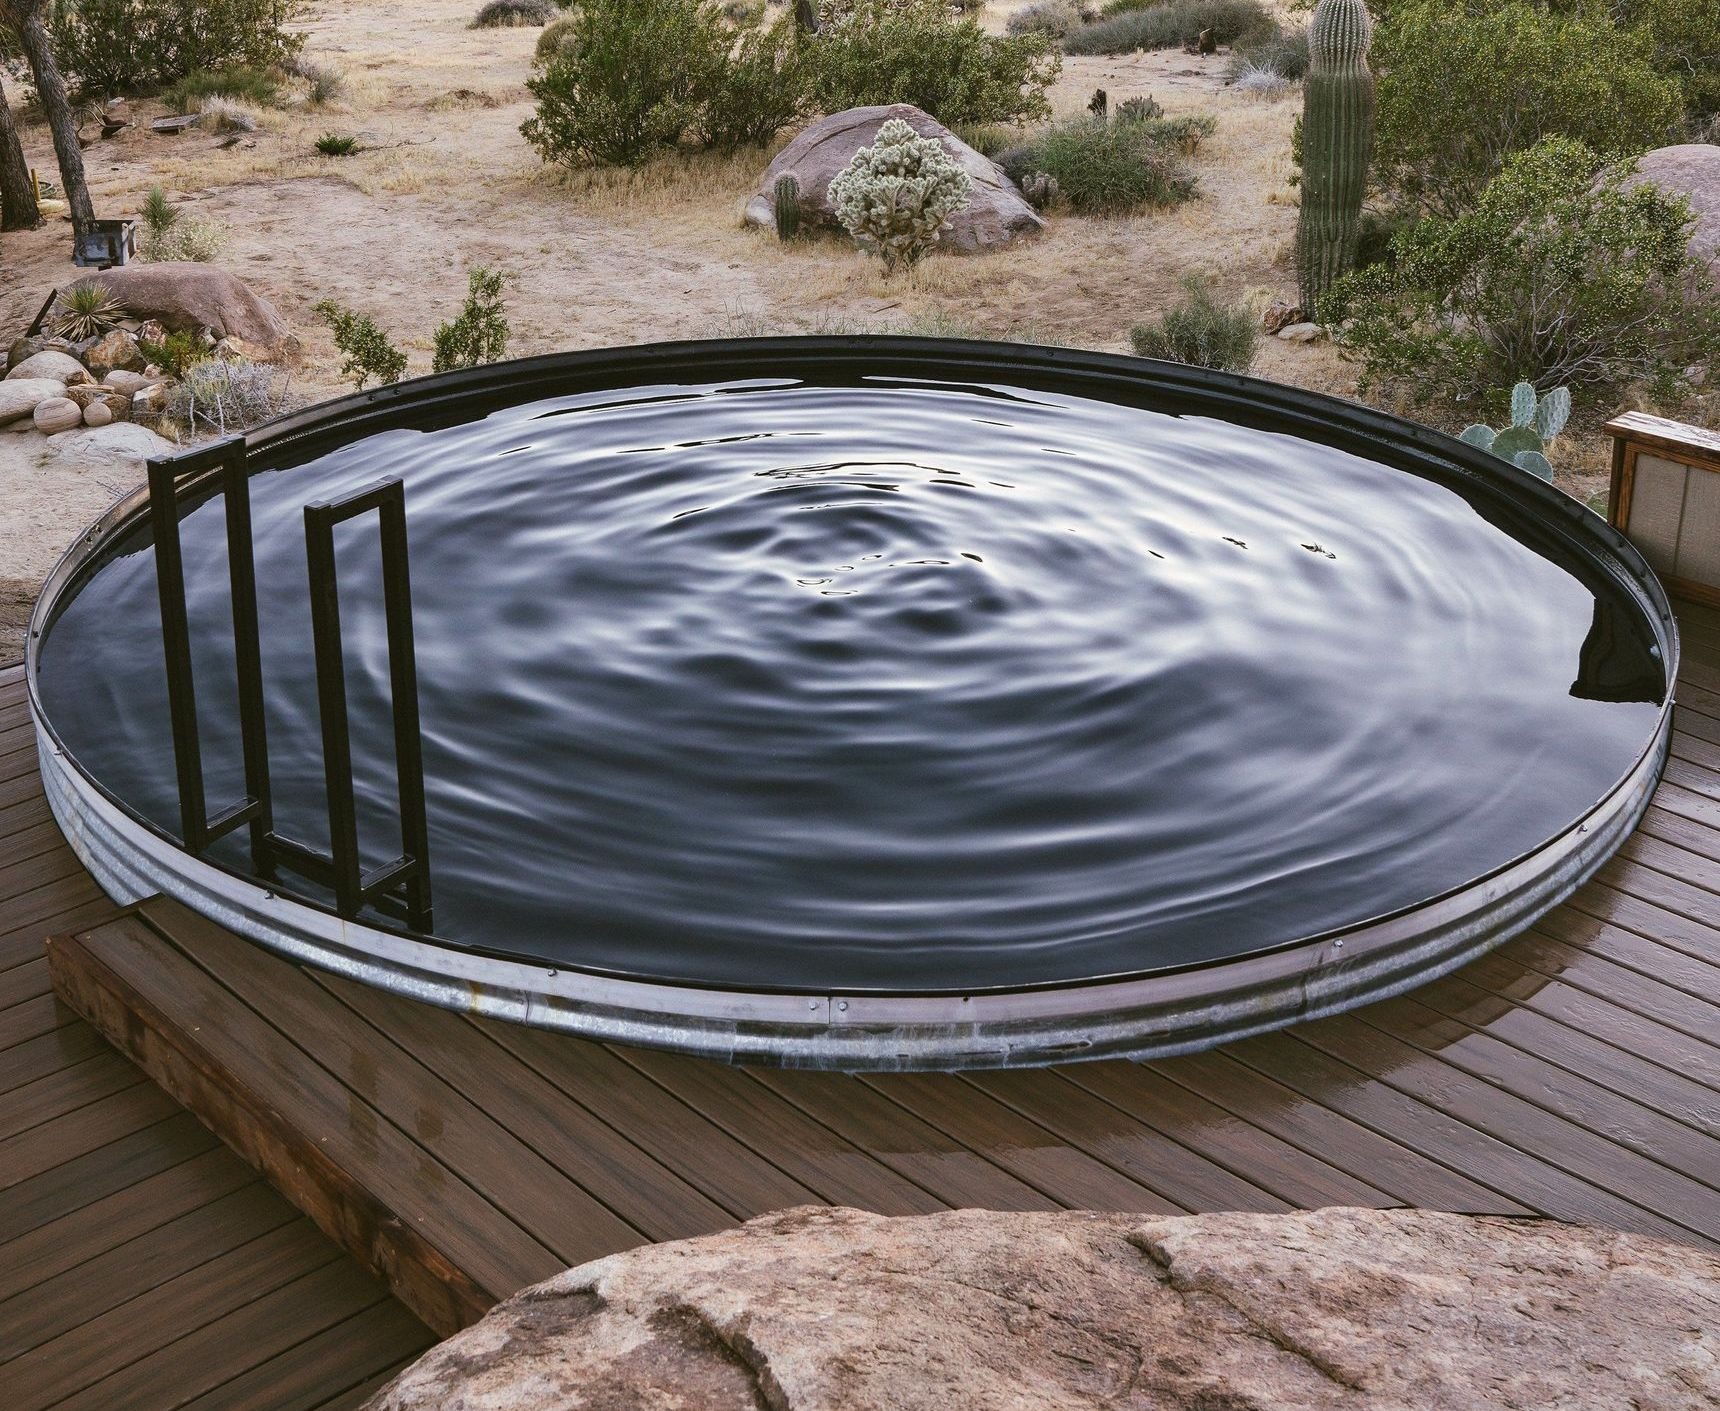 Close-up of tranquil rippling water in a stock tank pool surrounded by a desert landscape.